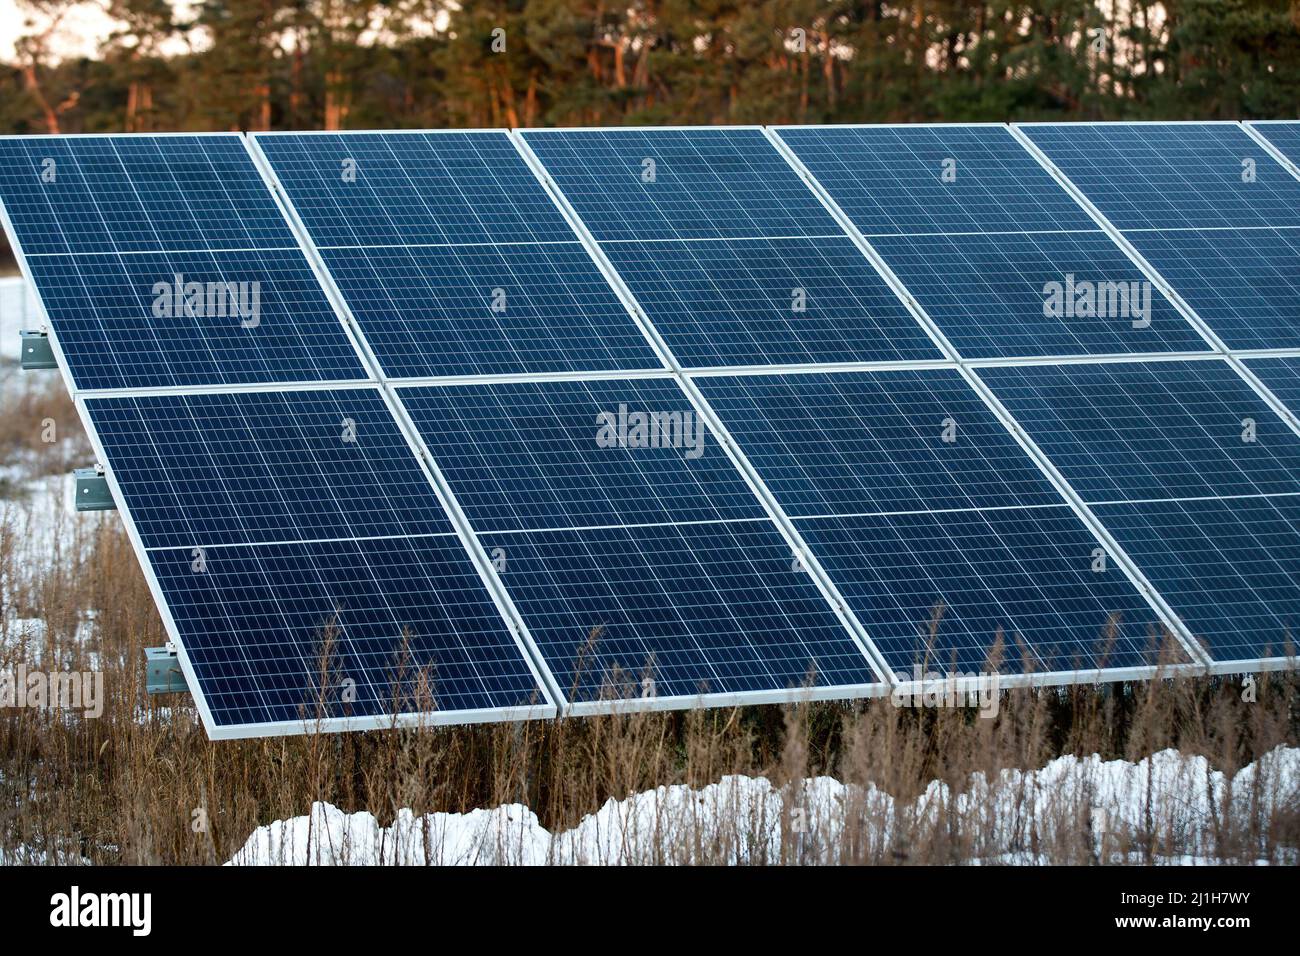 Solar panels seen at a plant in Lakie. Photovoltaic installations in Poland have been breaking popularity records in recent years, both among entrepreneurs and private individuals. Currently, the installed photovoltaic capacity in Poland is over 8,000 MW. Stock Photo